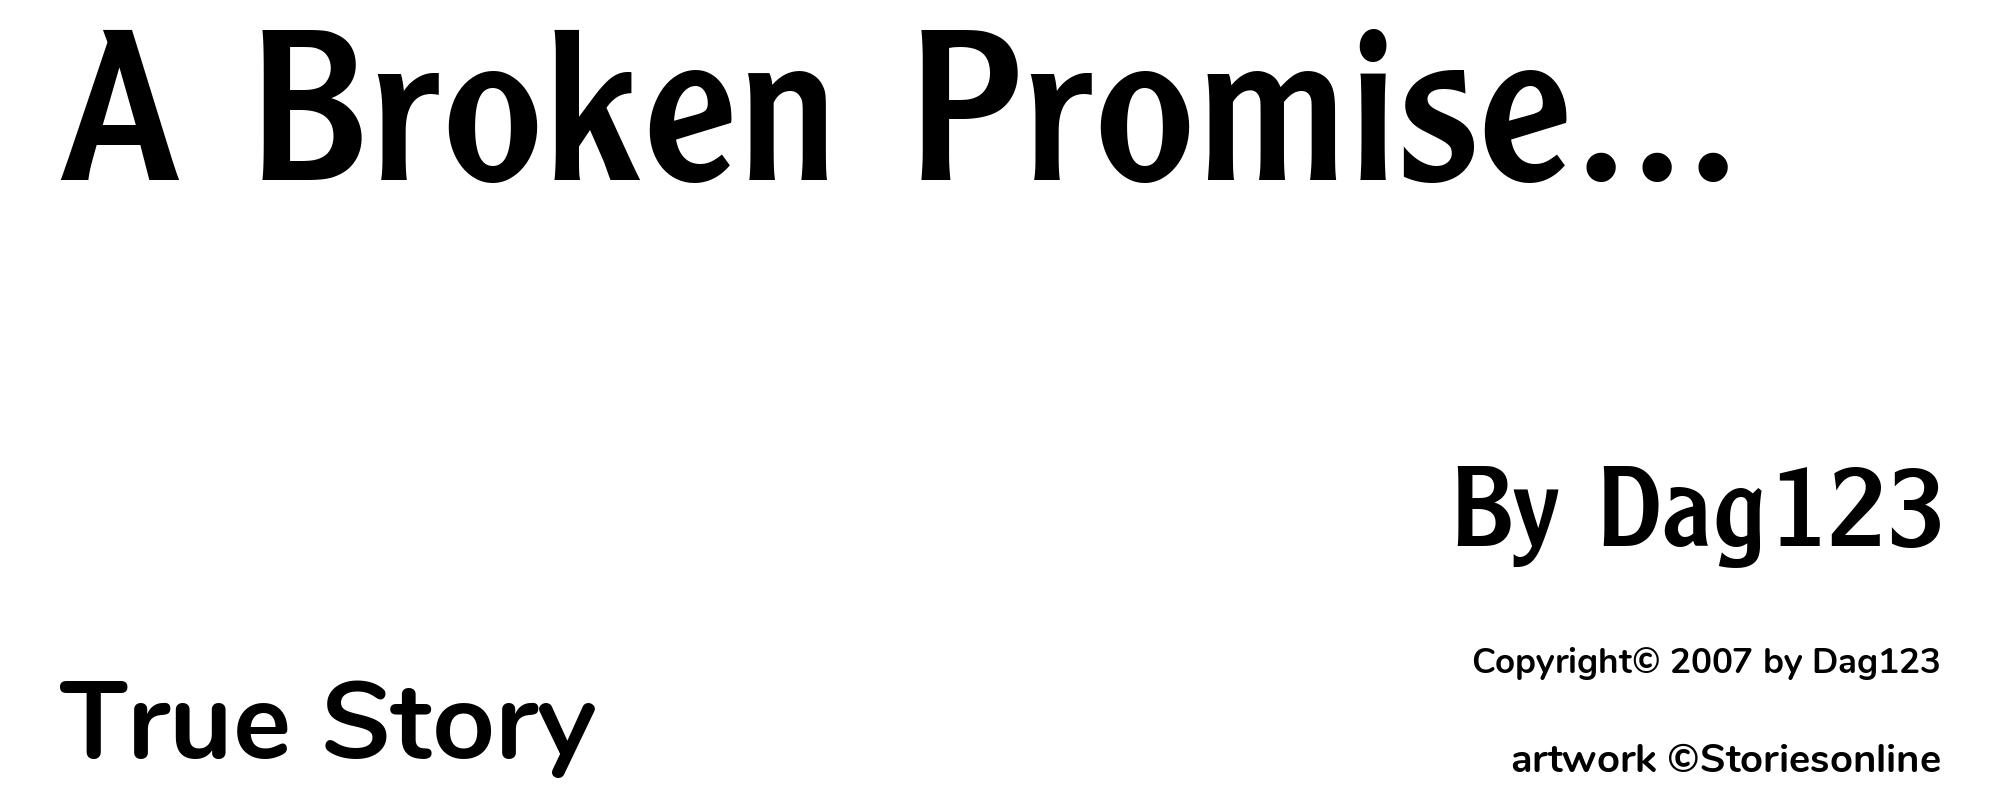 A Broken Promise... - Cover